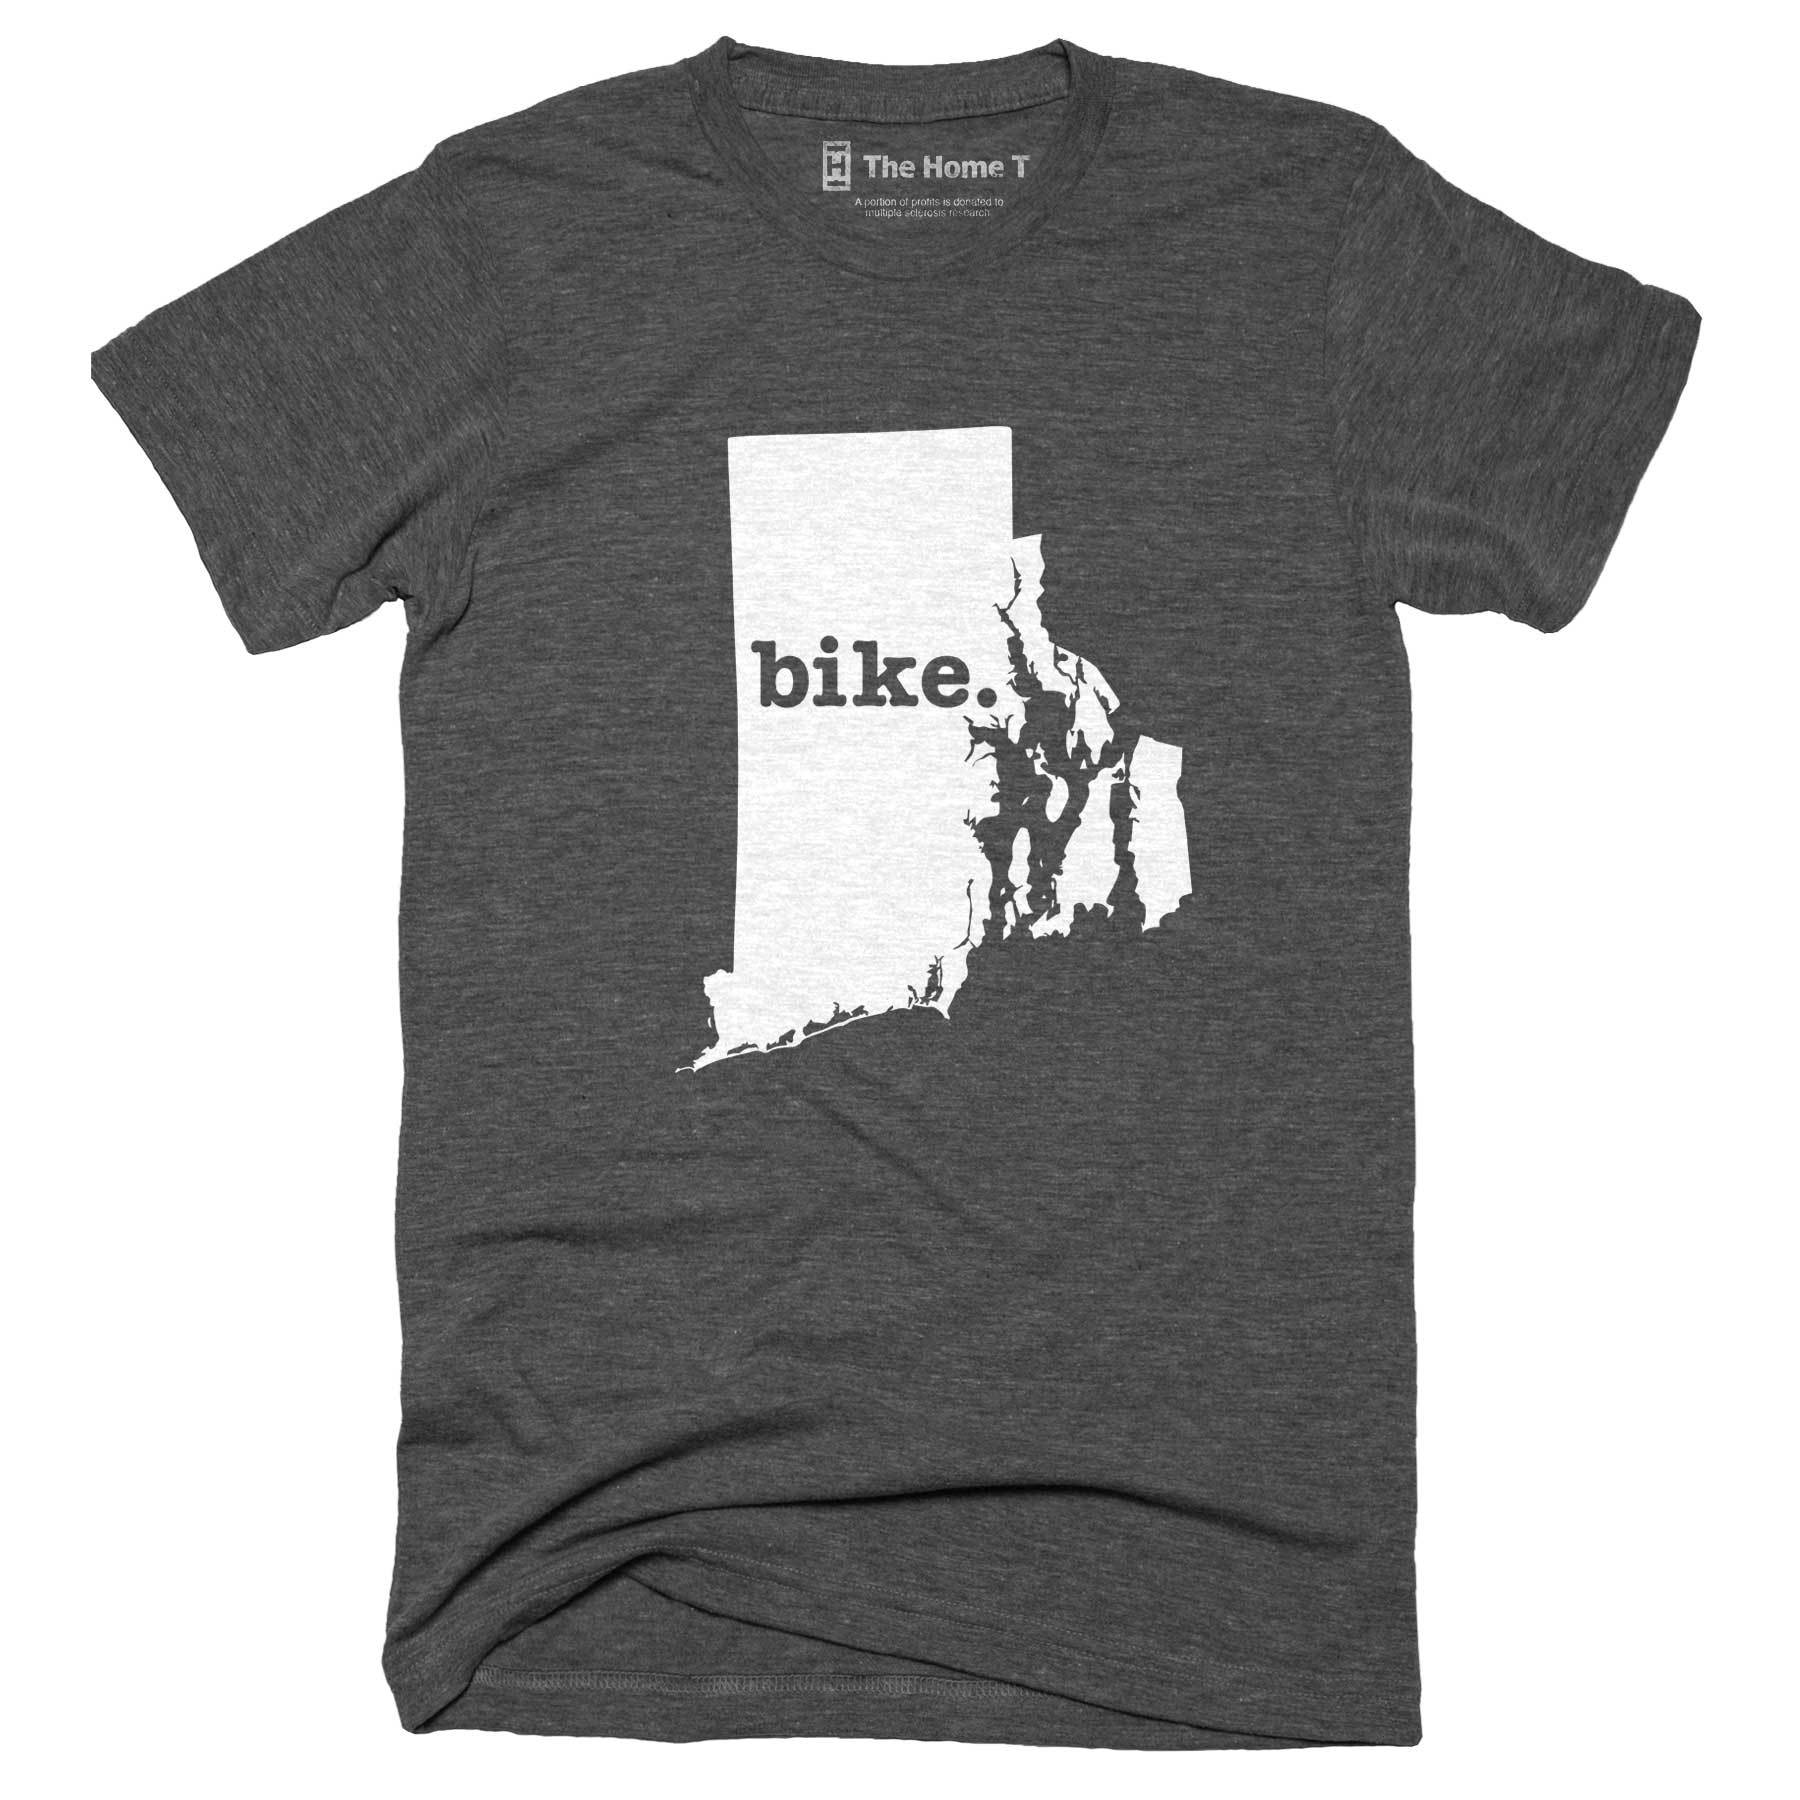 Rhode Island Bike Home T-Shirt Outdoor Collection The Home T XS Grey